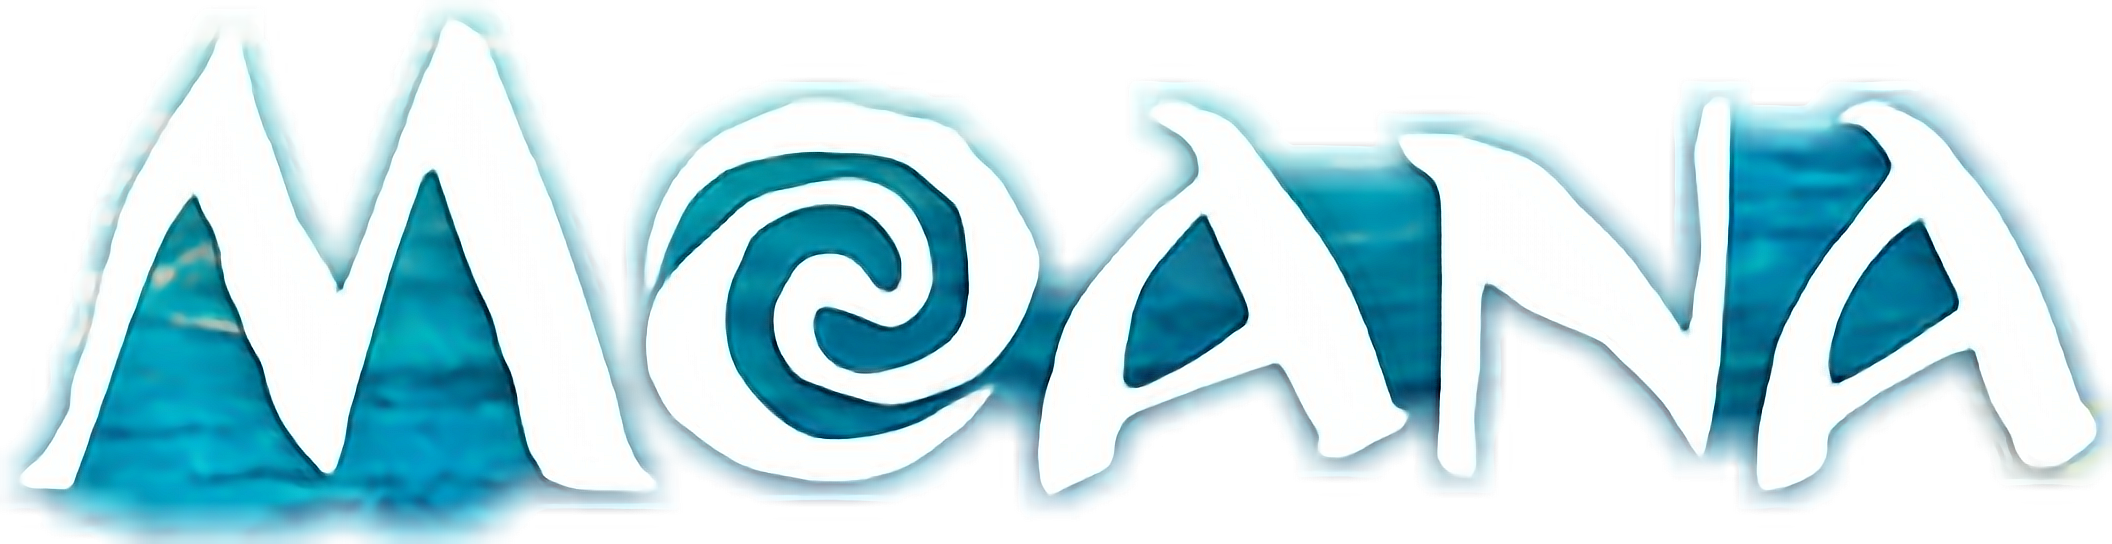 Moana Movie Title Graphic PNG